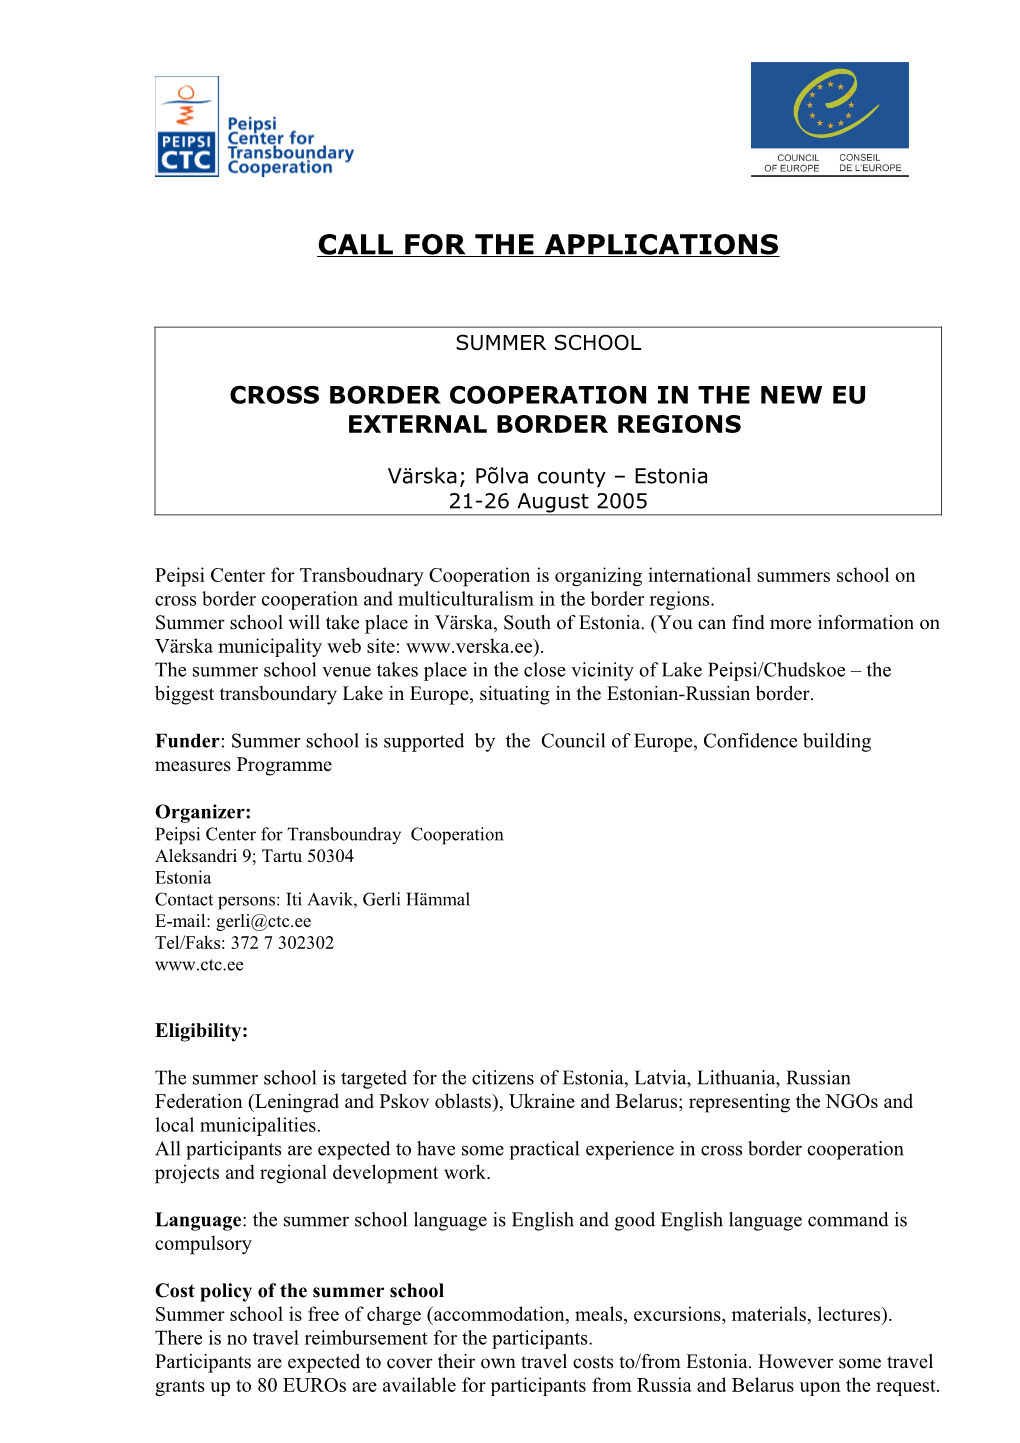 Call for the Applications